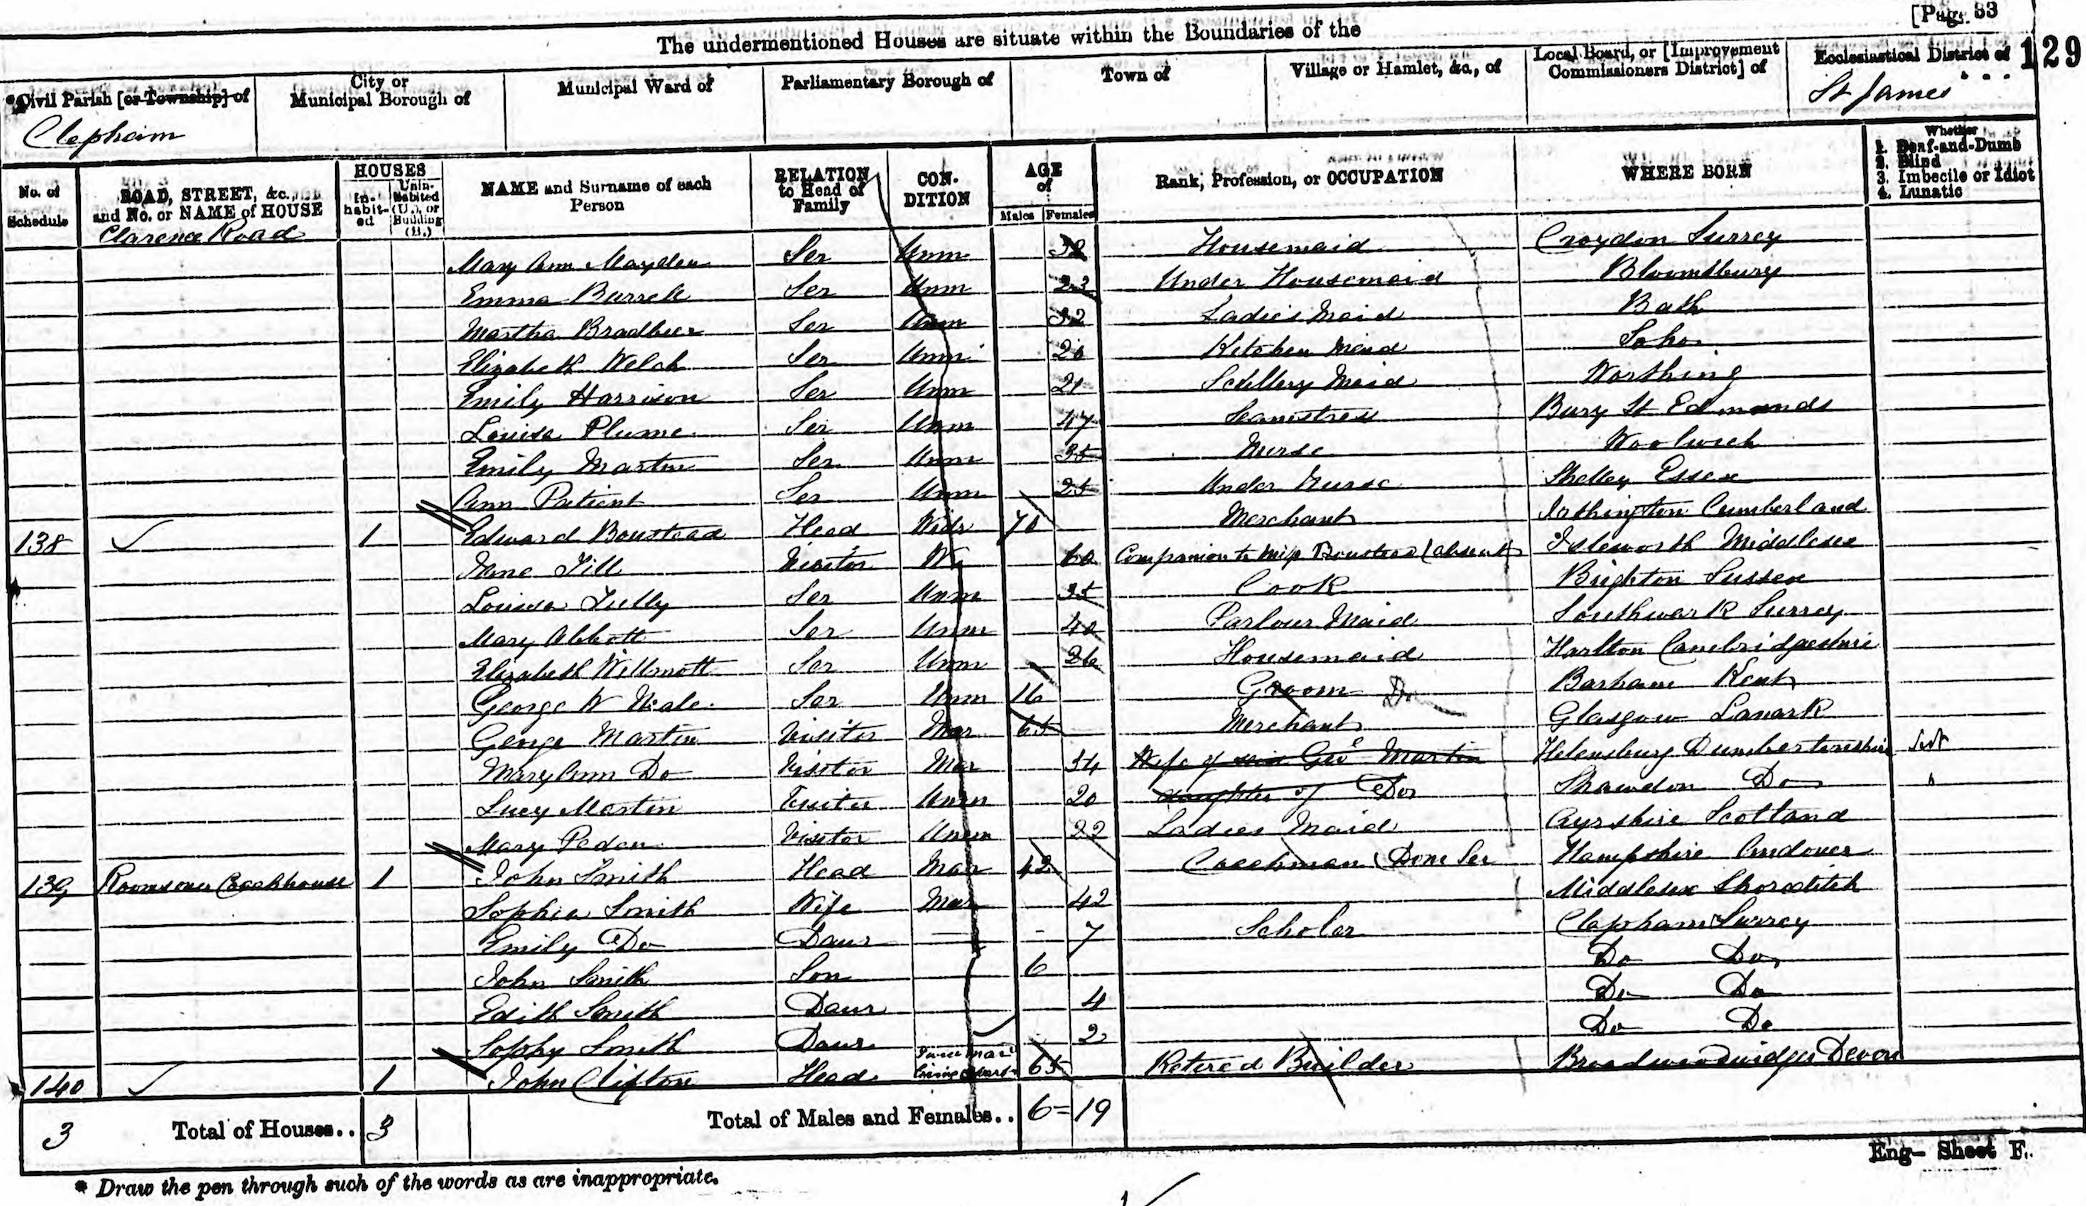 Edward Boustead on the 1871 census